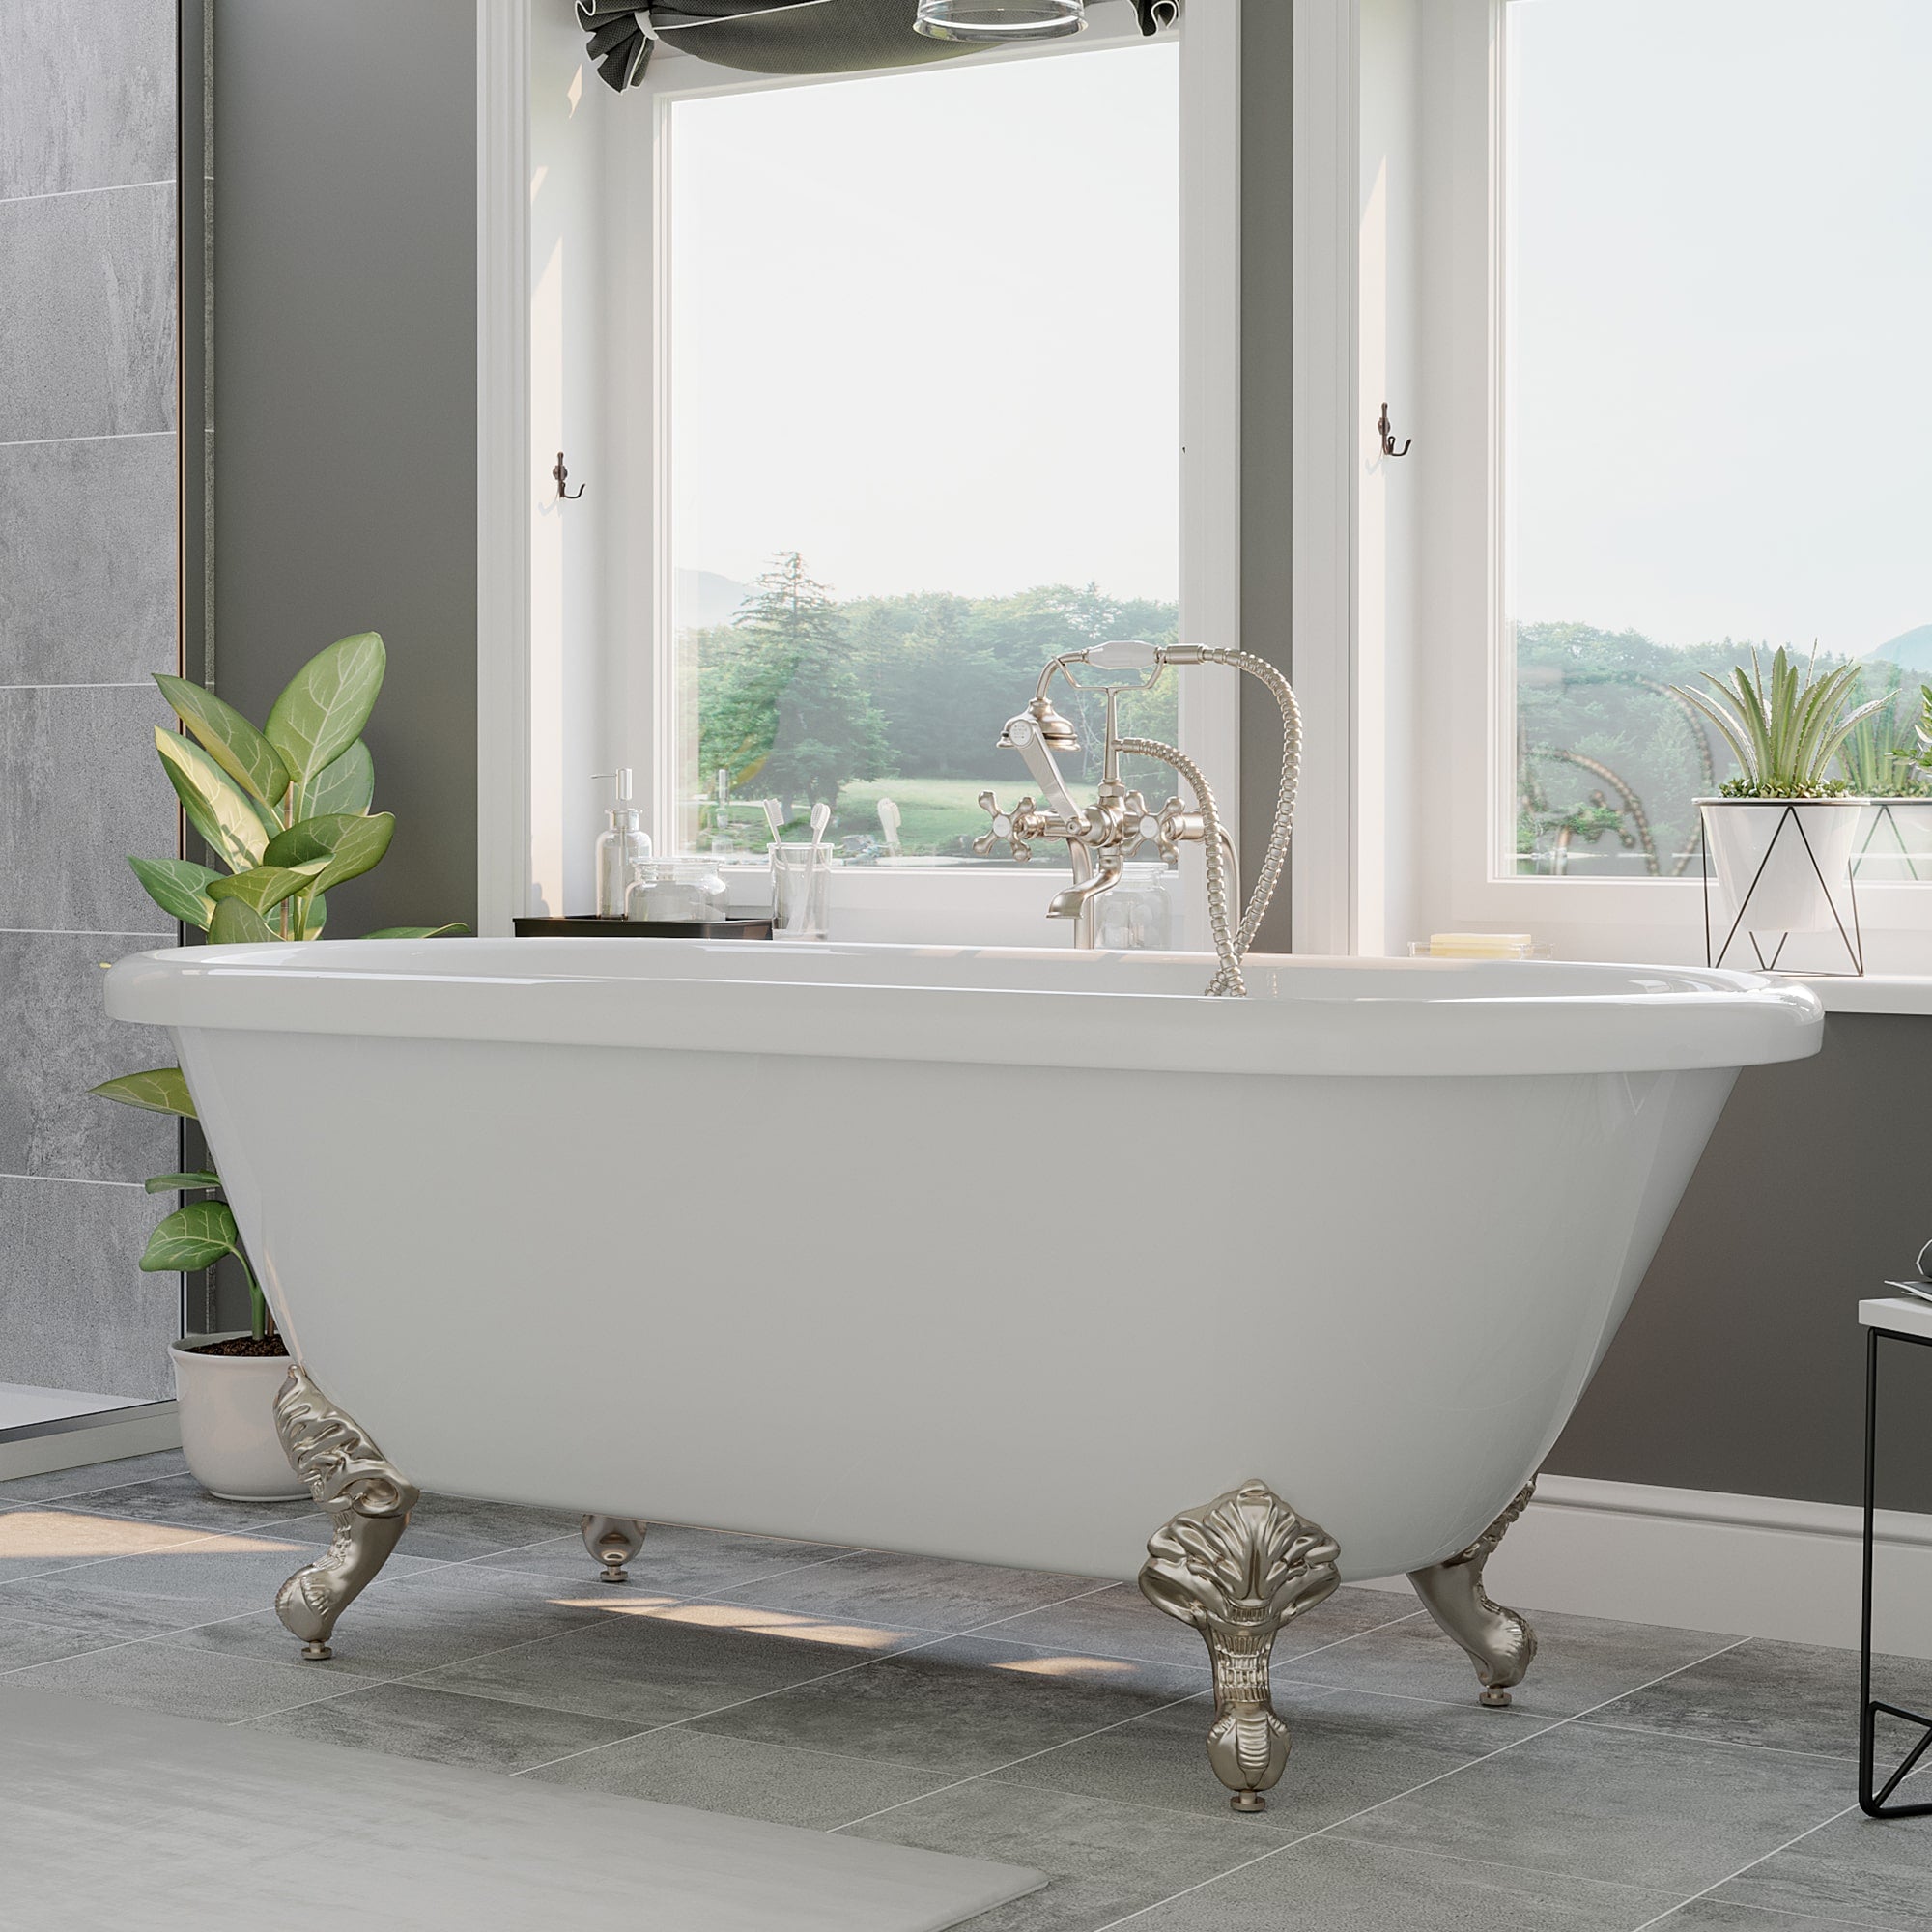 Cambridge Plumbing Double Ended Acrylic Clawfoot Bathtub (White Gloss Finish) with Continuous Rim and Complete Plumbing Package -Brushed nickel ball and claws feet - ADE60-398463-PKG-NH - Vital Hydrotherapy